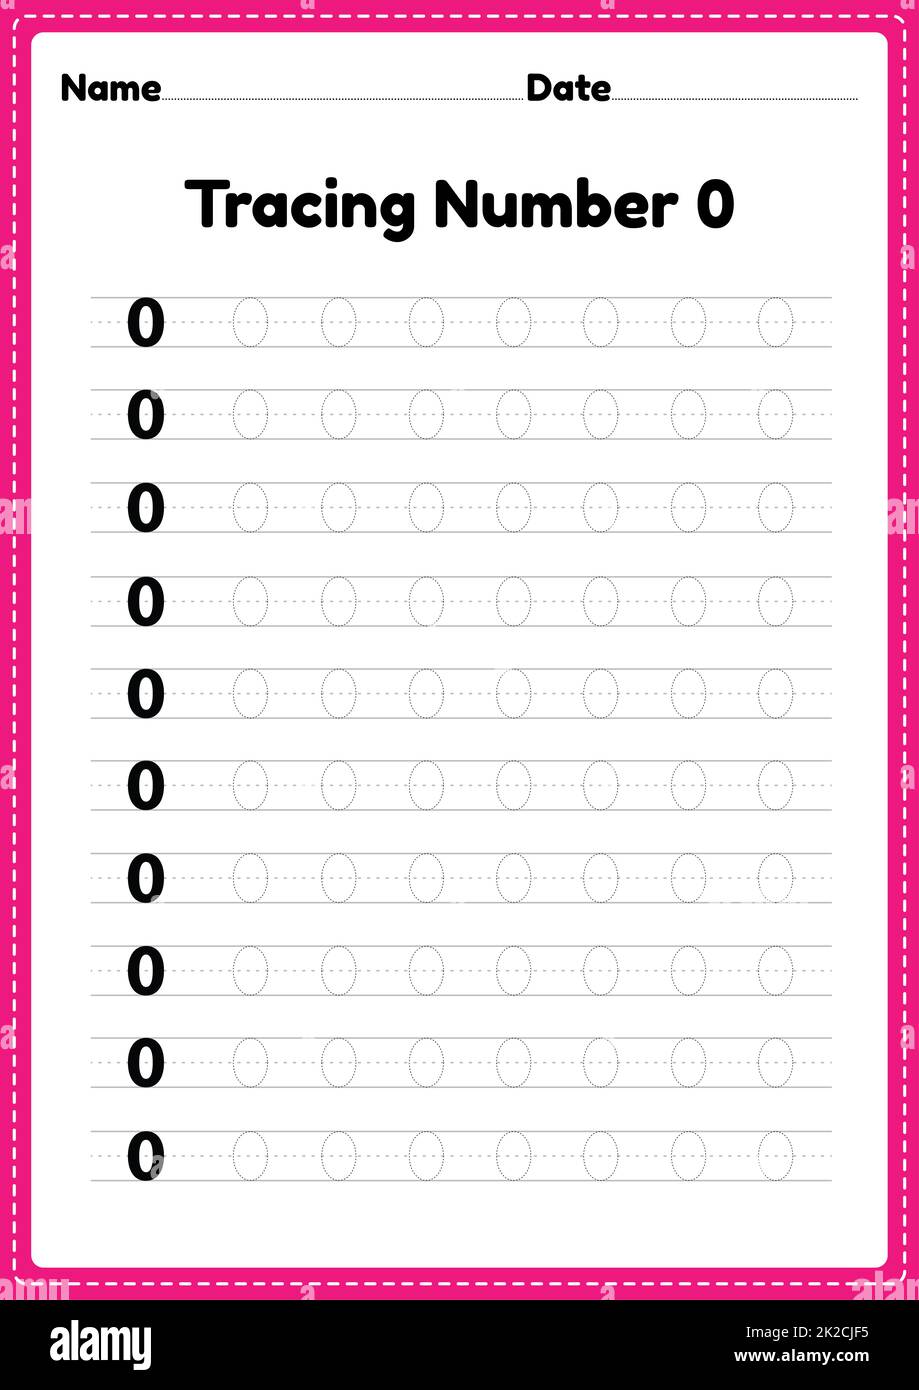 Tracing number 0 worksheet for kindergarten and preschool kids for educational handwriting practice in a printable page. Stock Photo